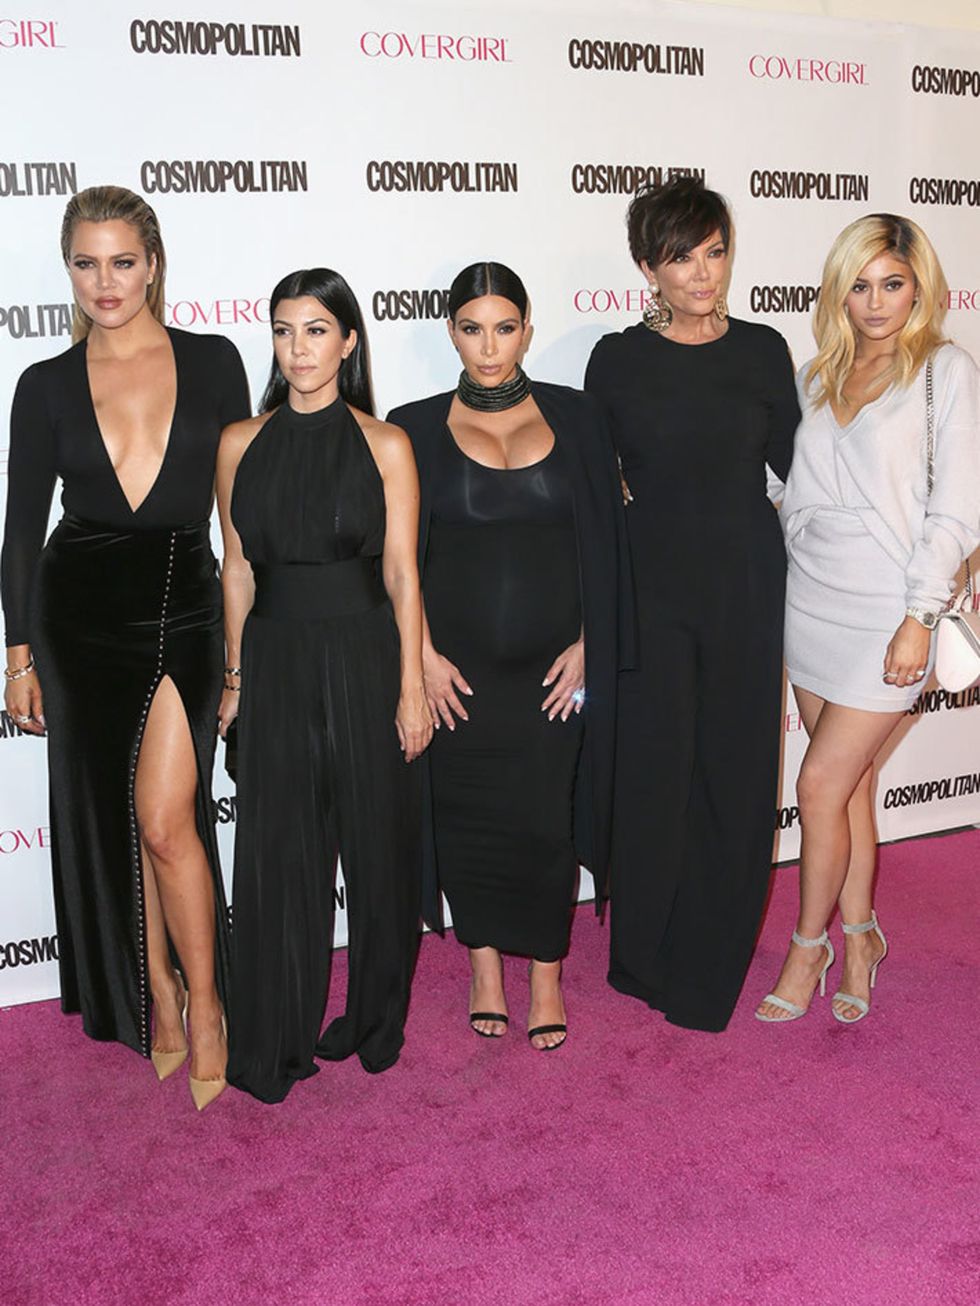 Kourtney and Kim Kardashian rep Balmain at Cosmopolitan's 50th birthday party. Kourtney opts for a current collection black jumpsuit, and Kim accessorises with a chunky Balmain necklace.